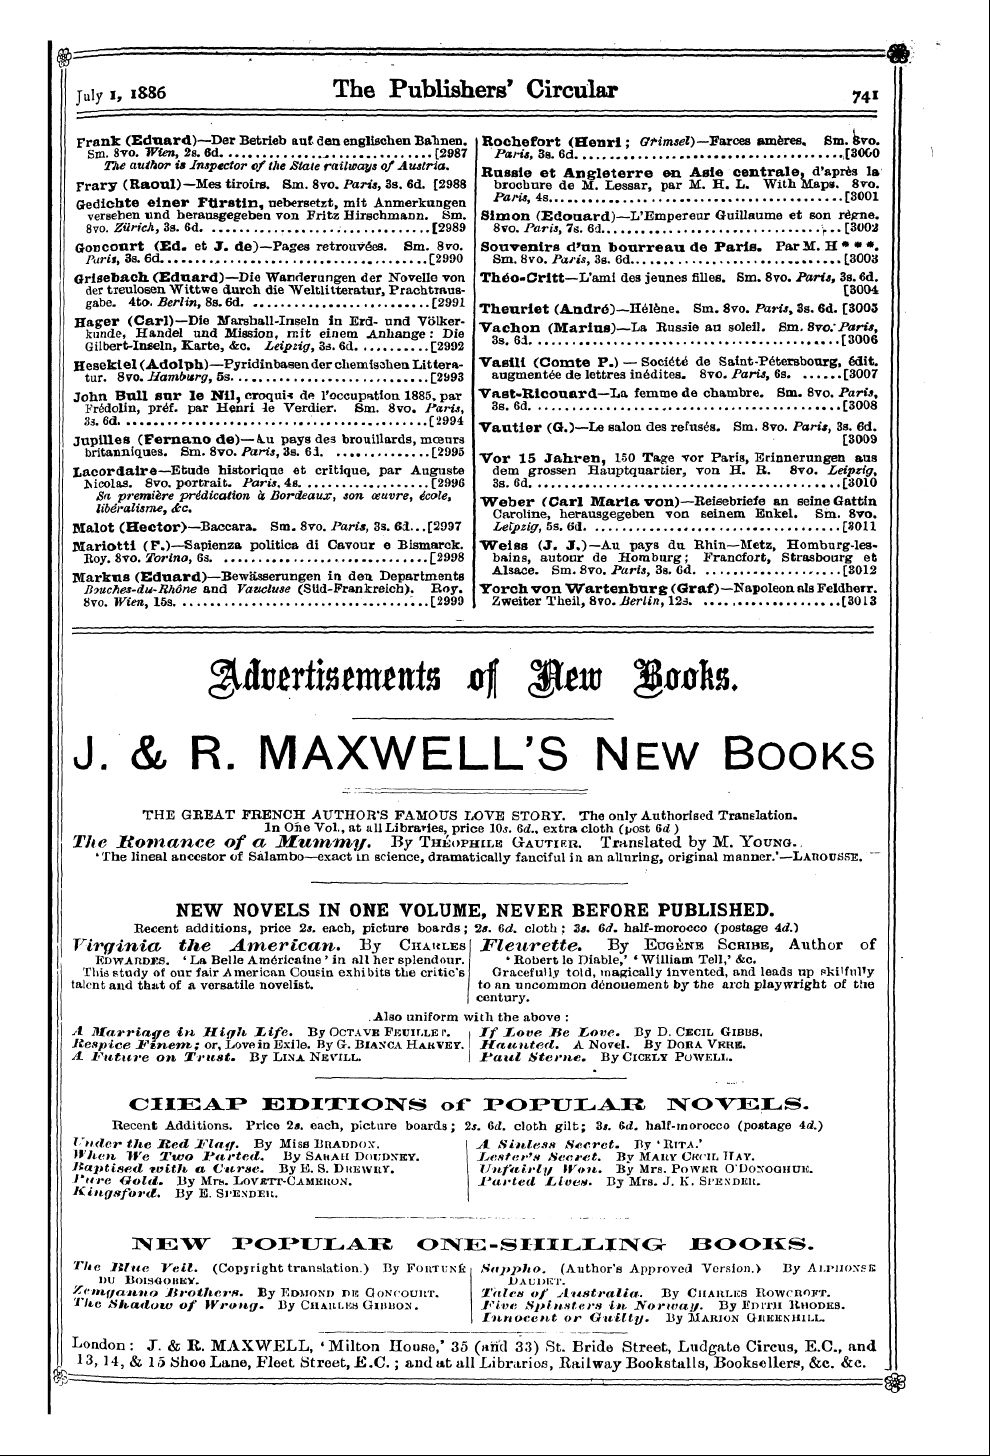 Publishers’ Circular (1880-1890): jS F Y, 1st edition - Recent Foreign Works. I